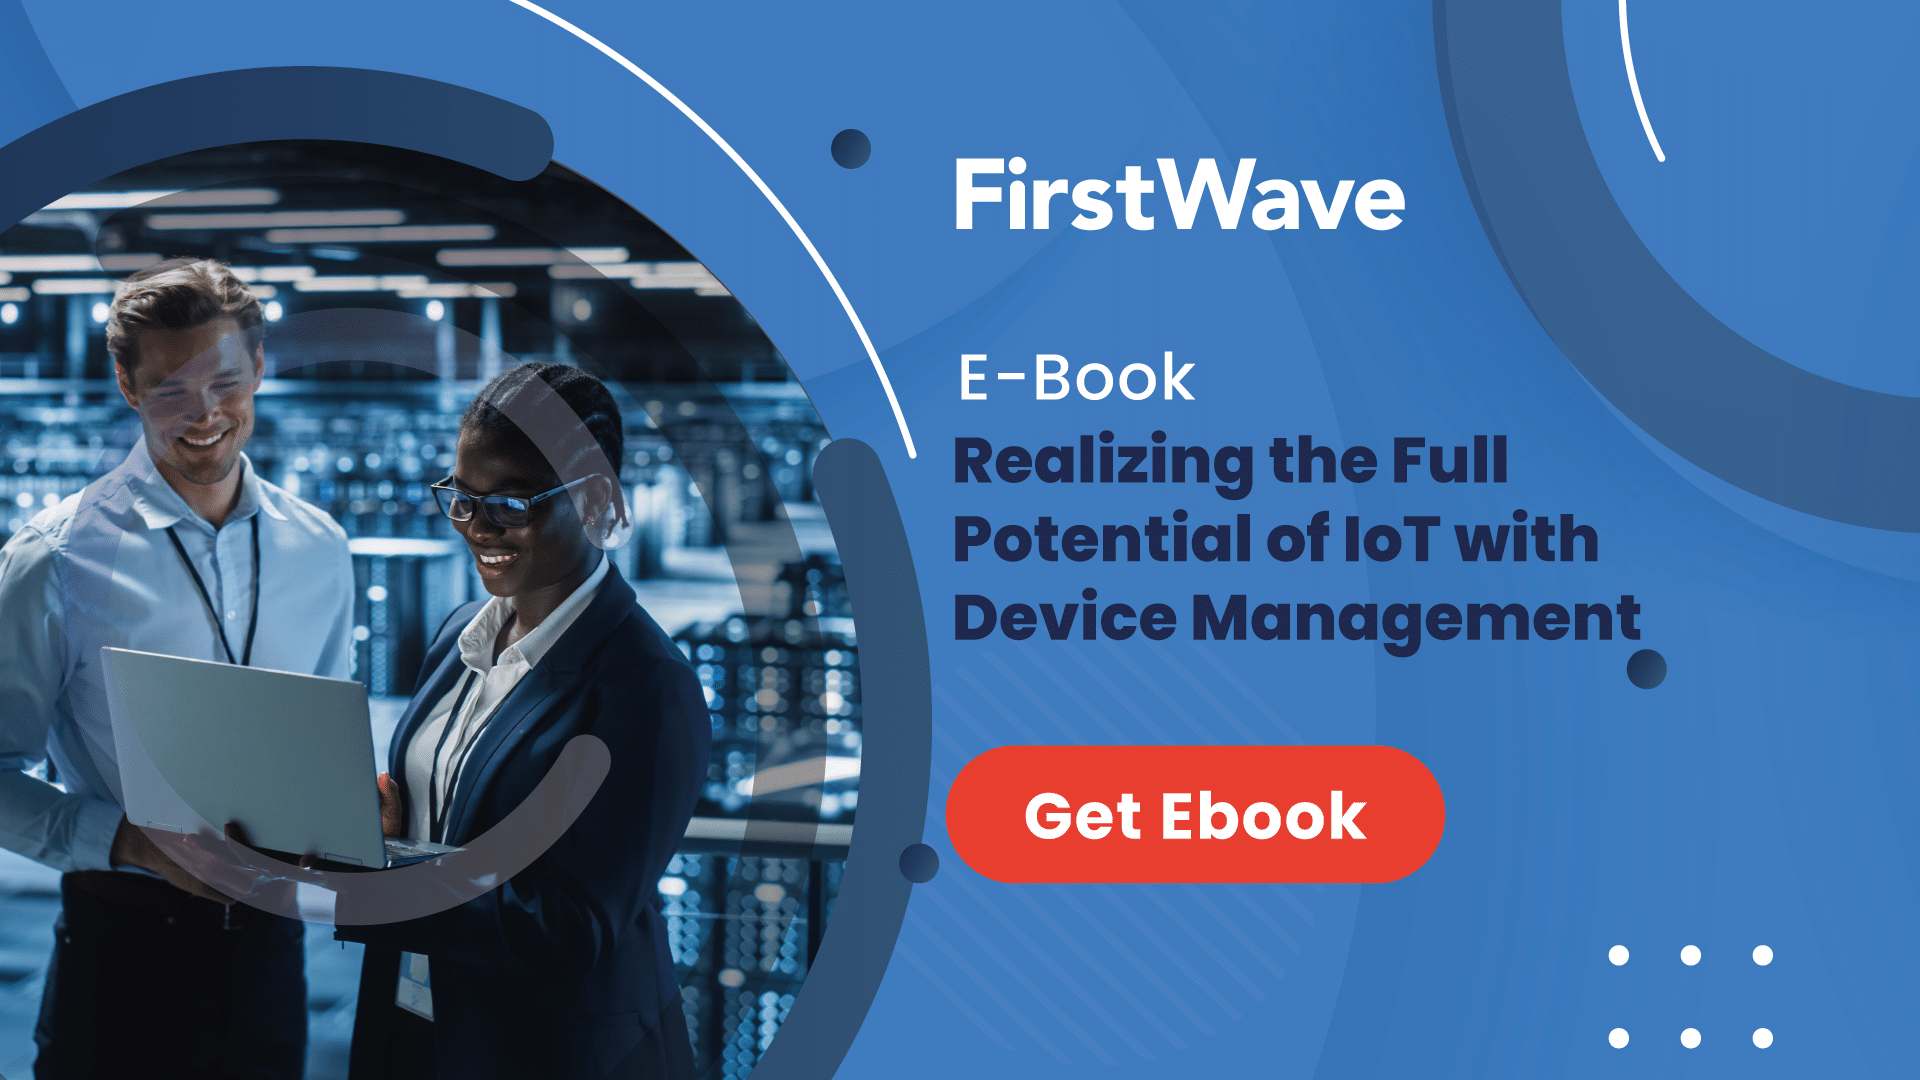 Realizing the Full Potential of IoT with Device Management - Featured Image